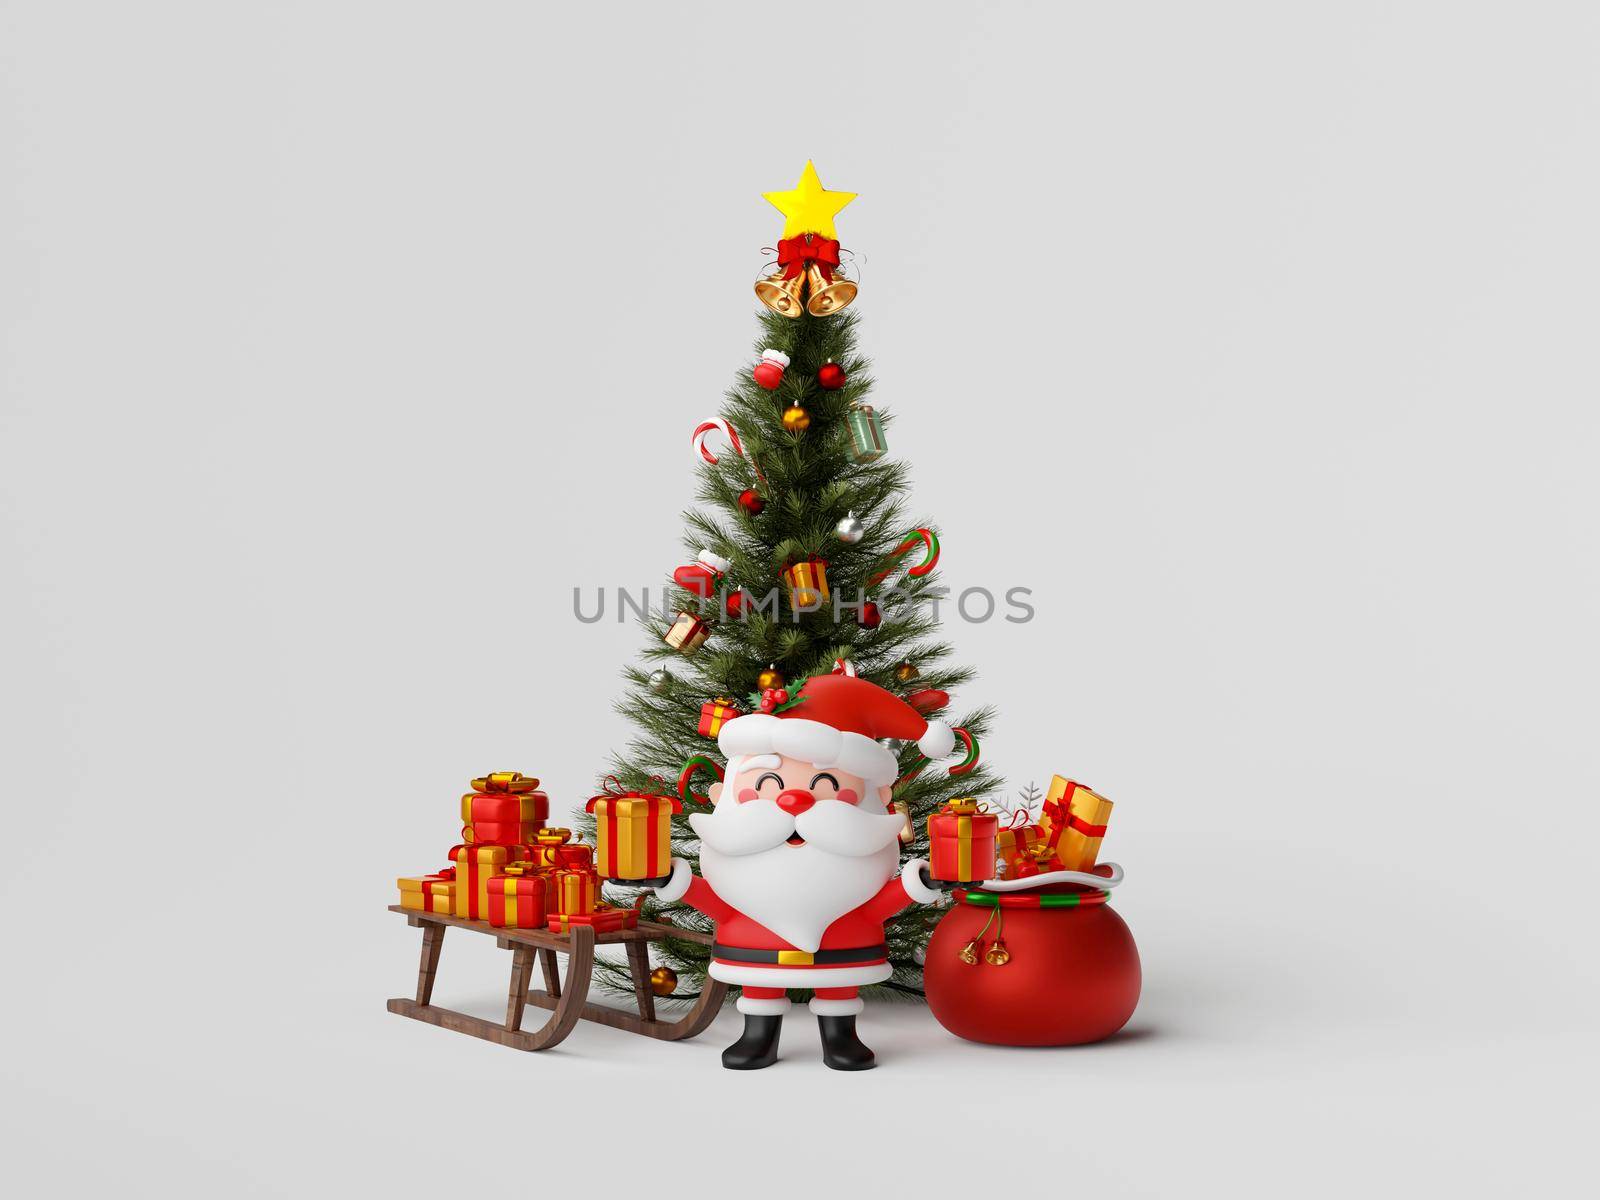 Christmas banner of Santa Claus with Christmas tree and gift, 3d illustration by nutzchotwarut